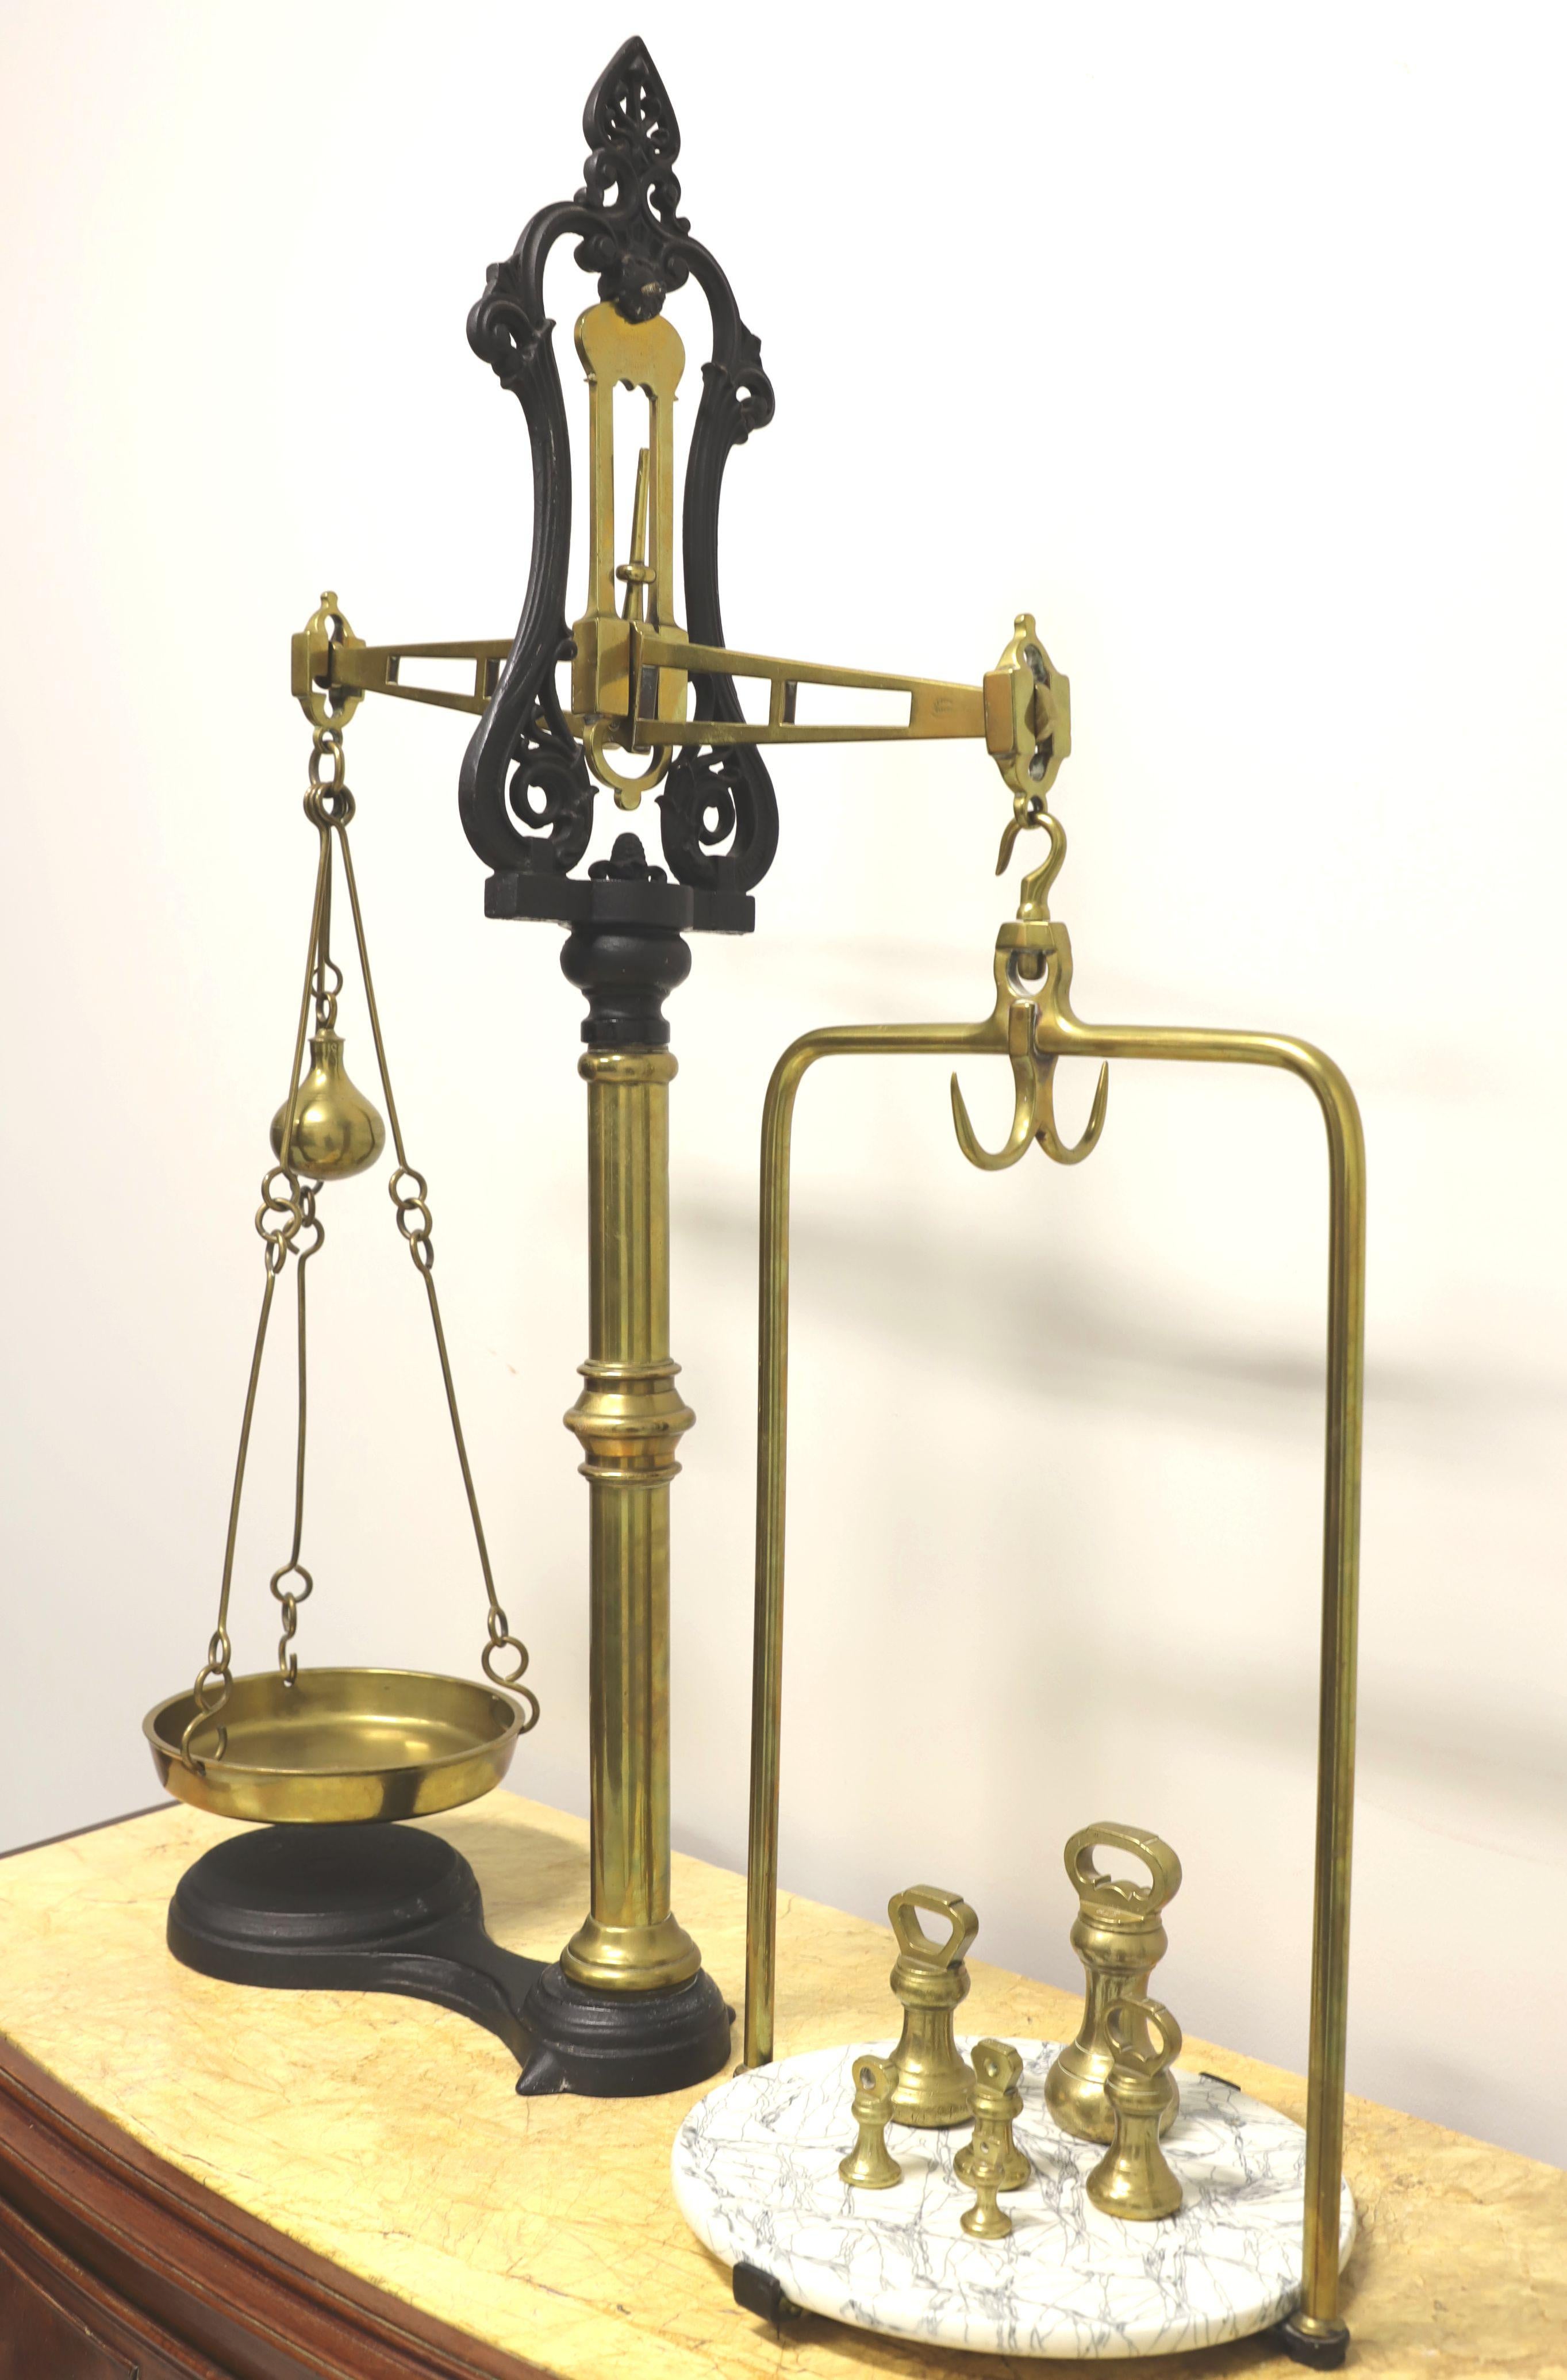 An antique 19th century Victorian period market scale by J.H. Piper & Co. of Wolverhampton, Staffordshire, England, UK. Cast iron base, bowl rest, interior shaft, decorative top and round tray base. Brass center shaft surround, balance beam, bowl,